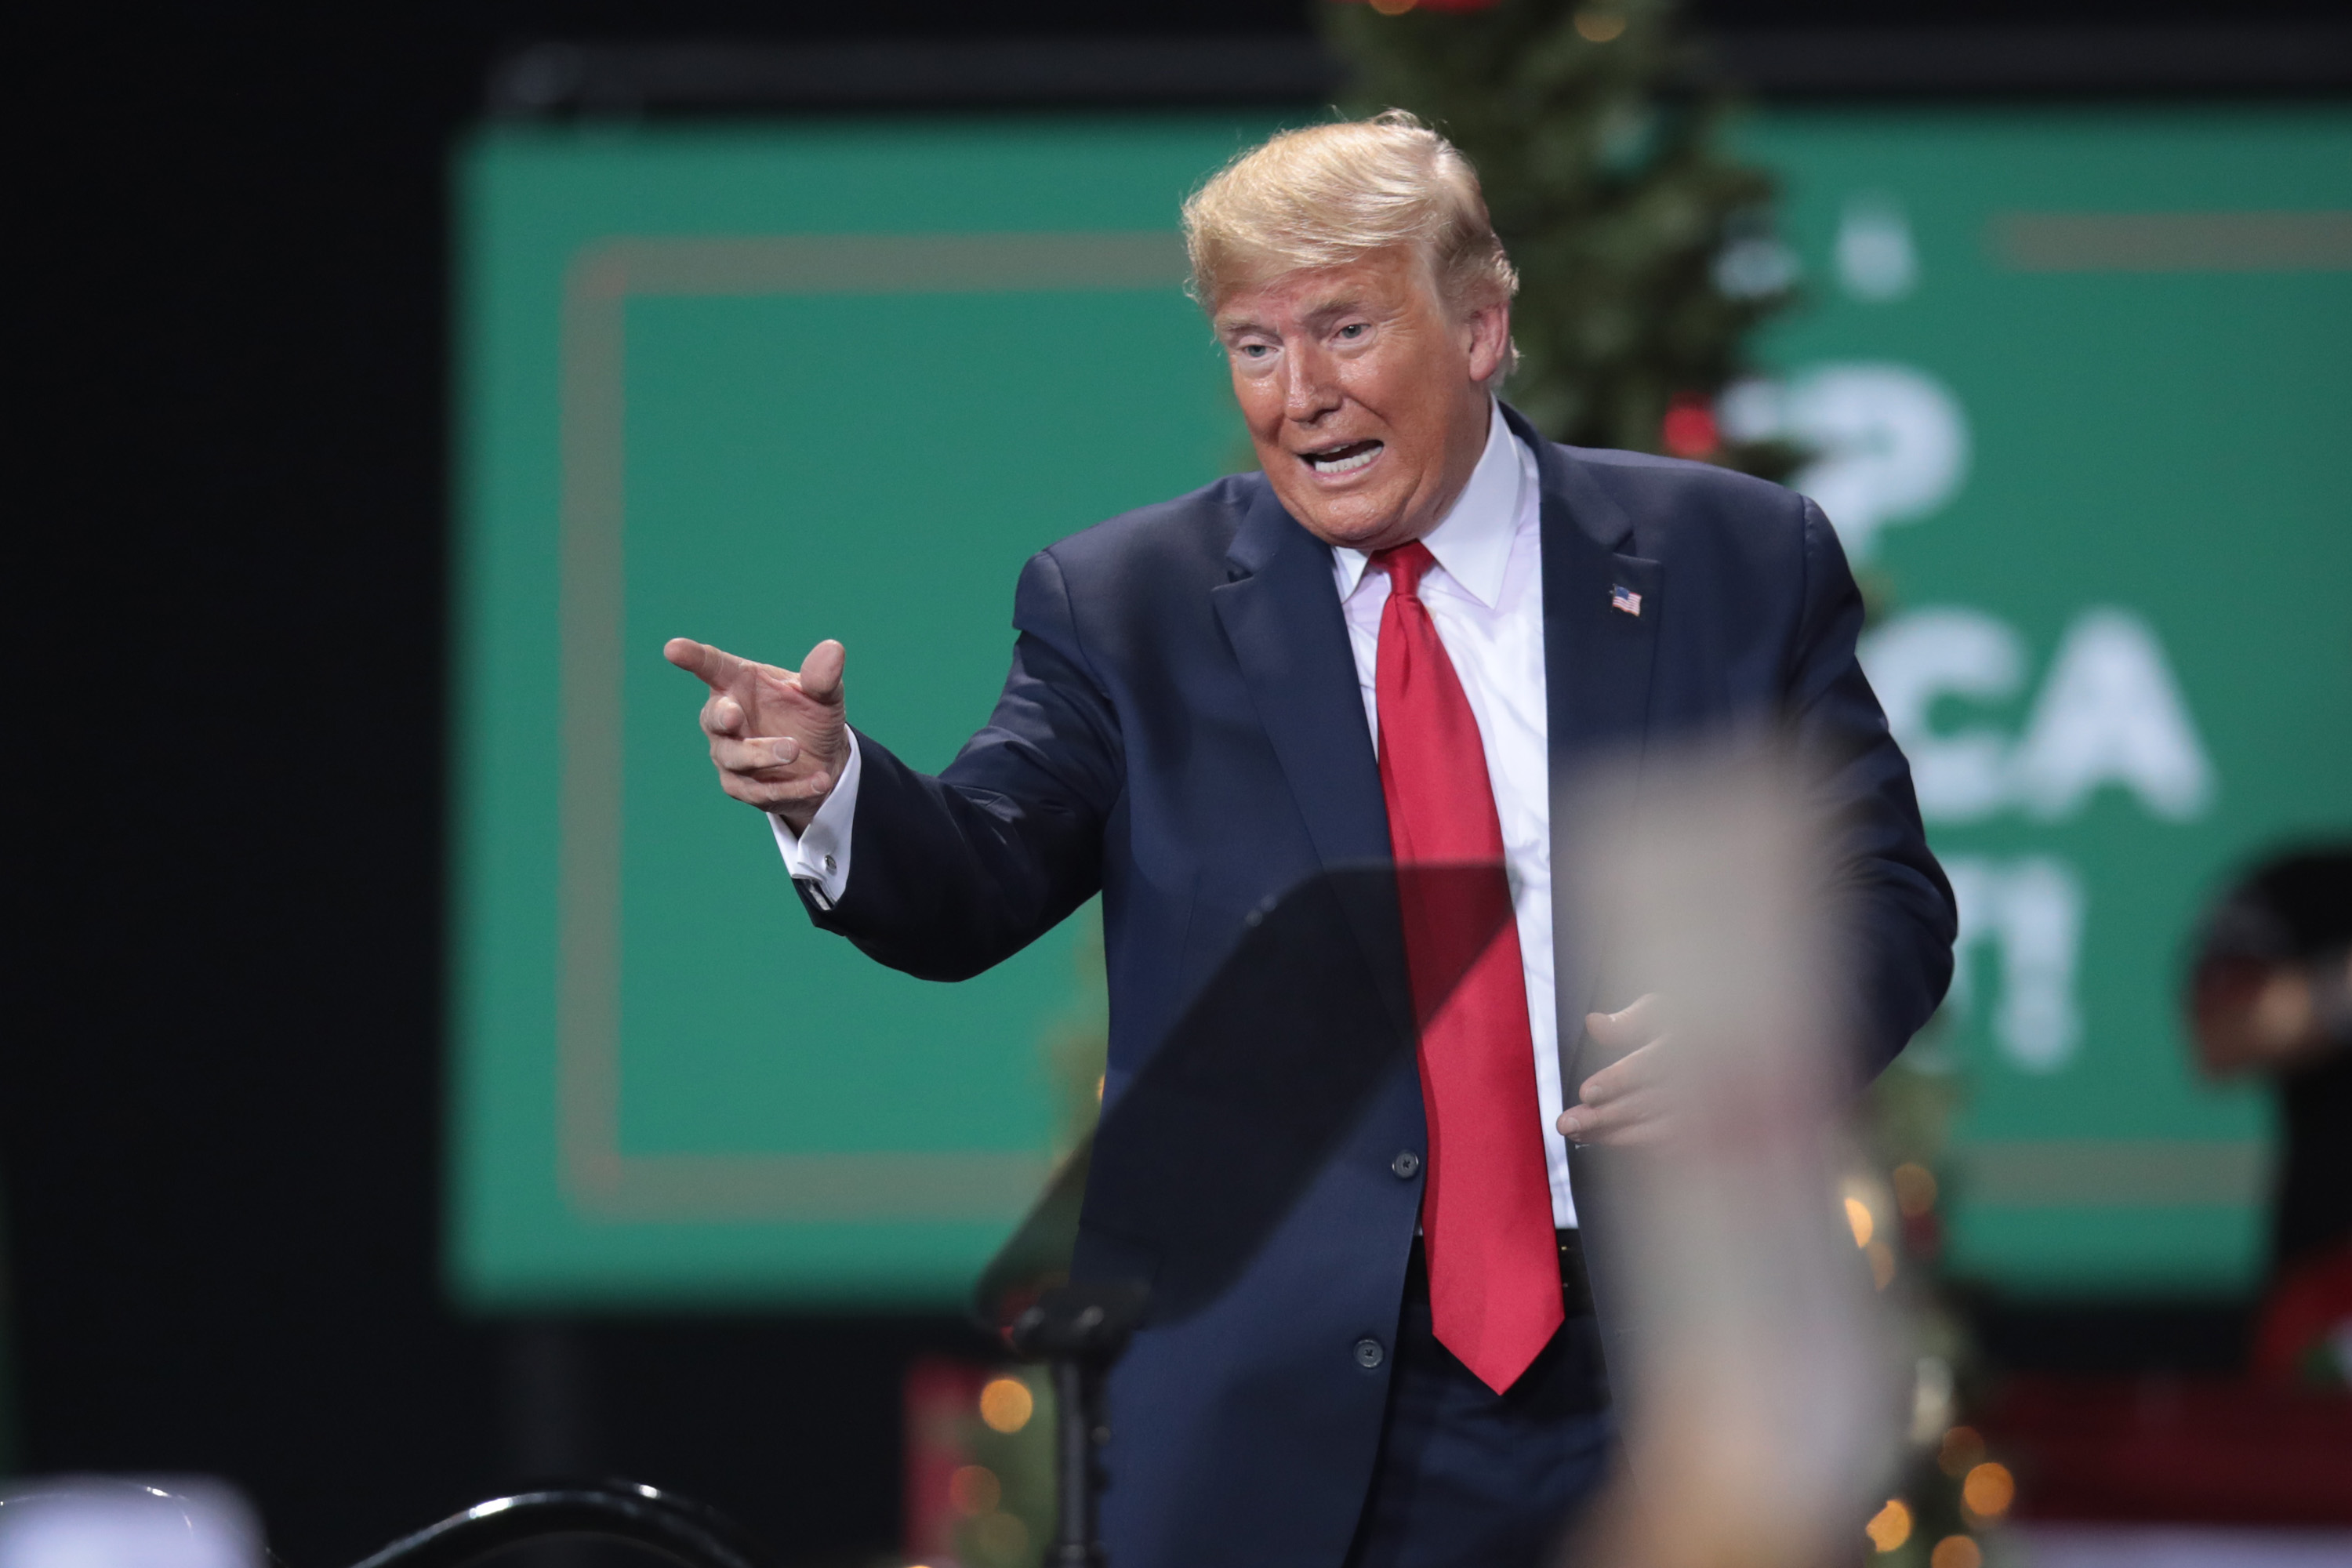 President Donald Trump leaves his Merry Christmas Rally at the Kellogg Arena on December 18, 2019 in Battle Creek, Michigan. (Scott Olson/Getty Images)